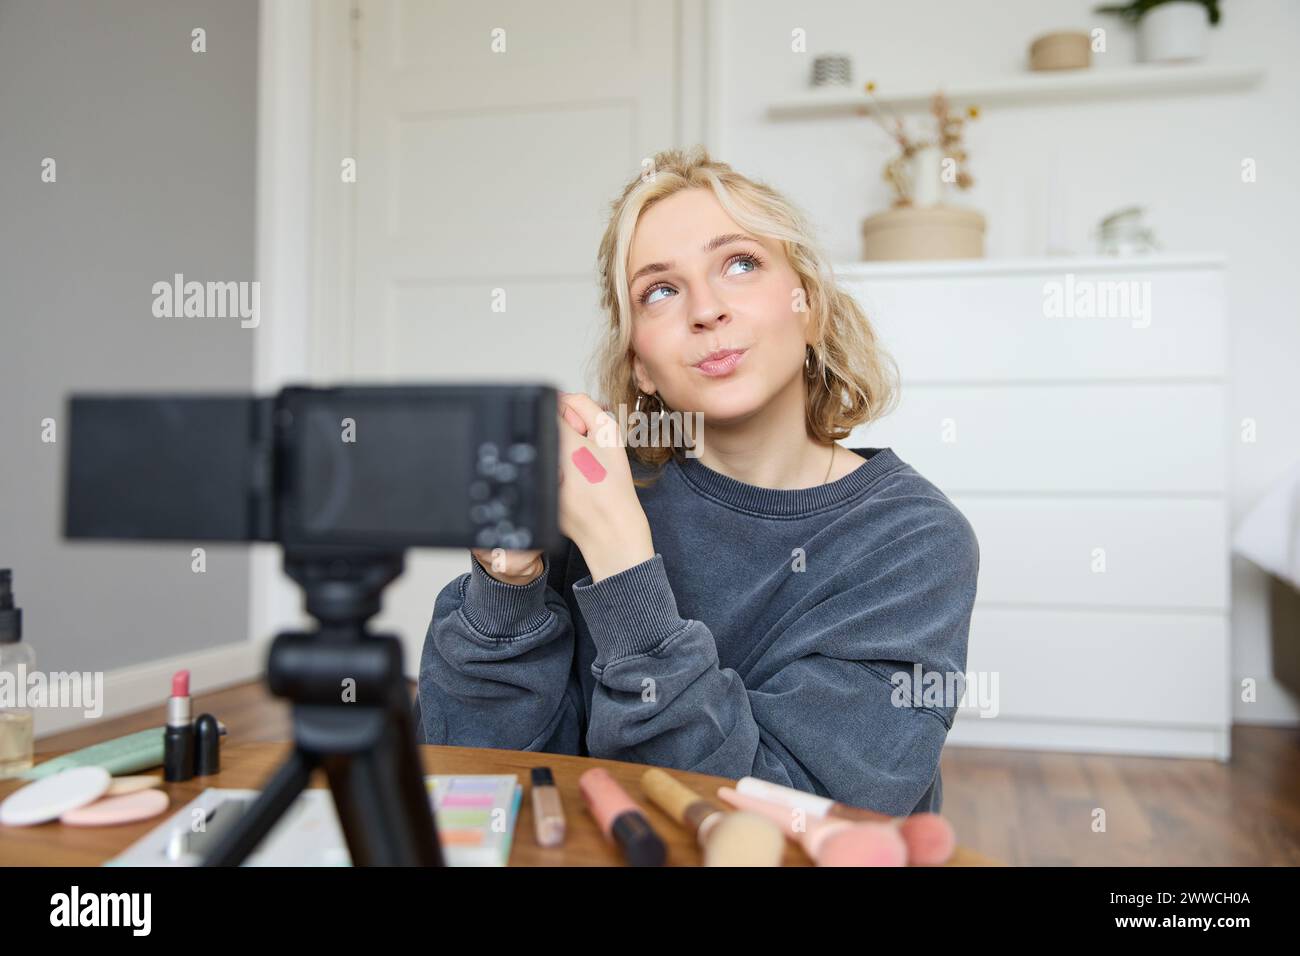 Portrait of young creative social media content creator, woman showing lipstick swatches on her hand, recording video about beauty and makeup, sitting Stock Photo